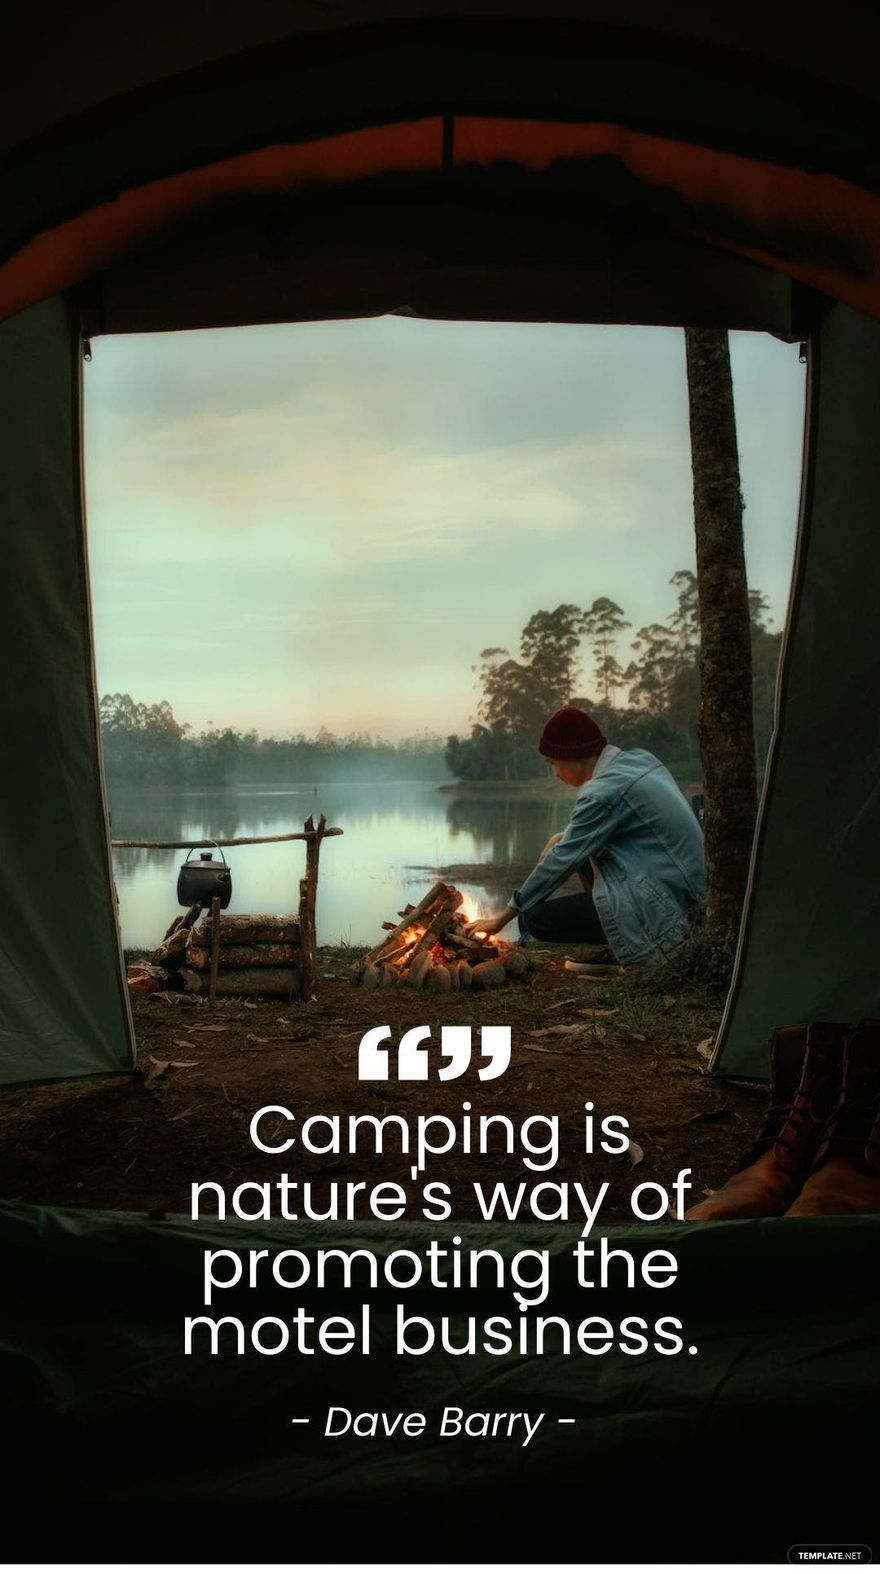 Free Dave Barry - Camping is nature's way of promoting the motel business. in JPG